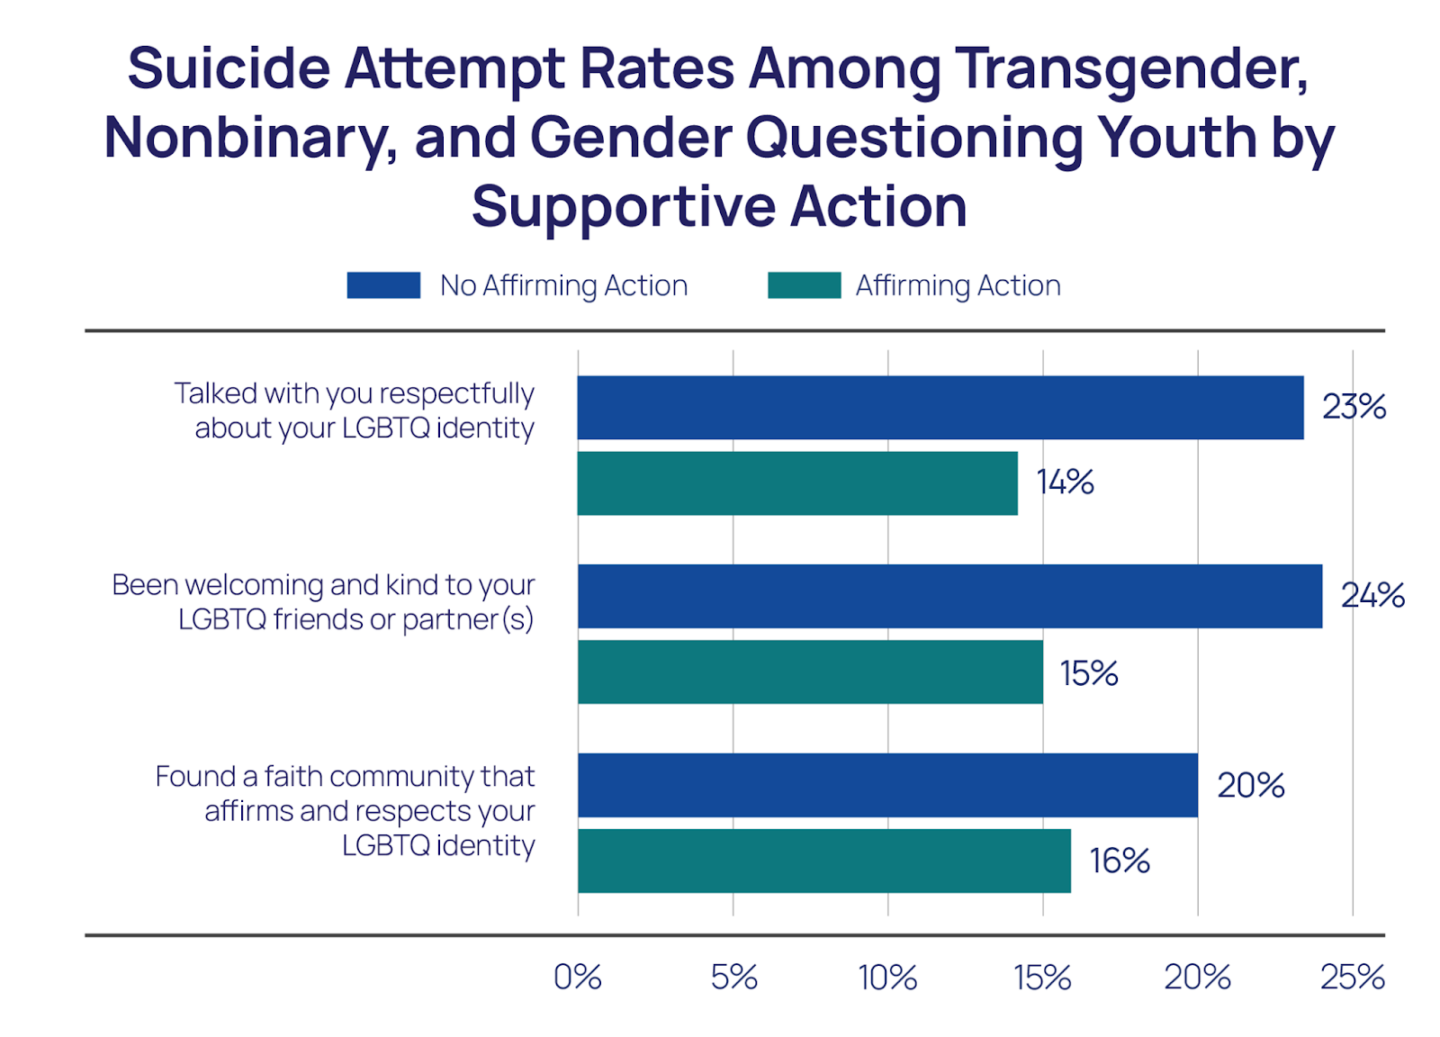 Suicide Attempt Rates Among Transgender, Nonbinary, and Gender Questioning Youth by Supportive Action Bar Chart